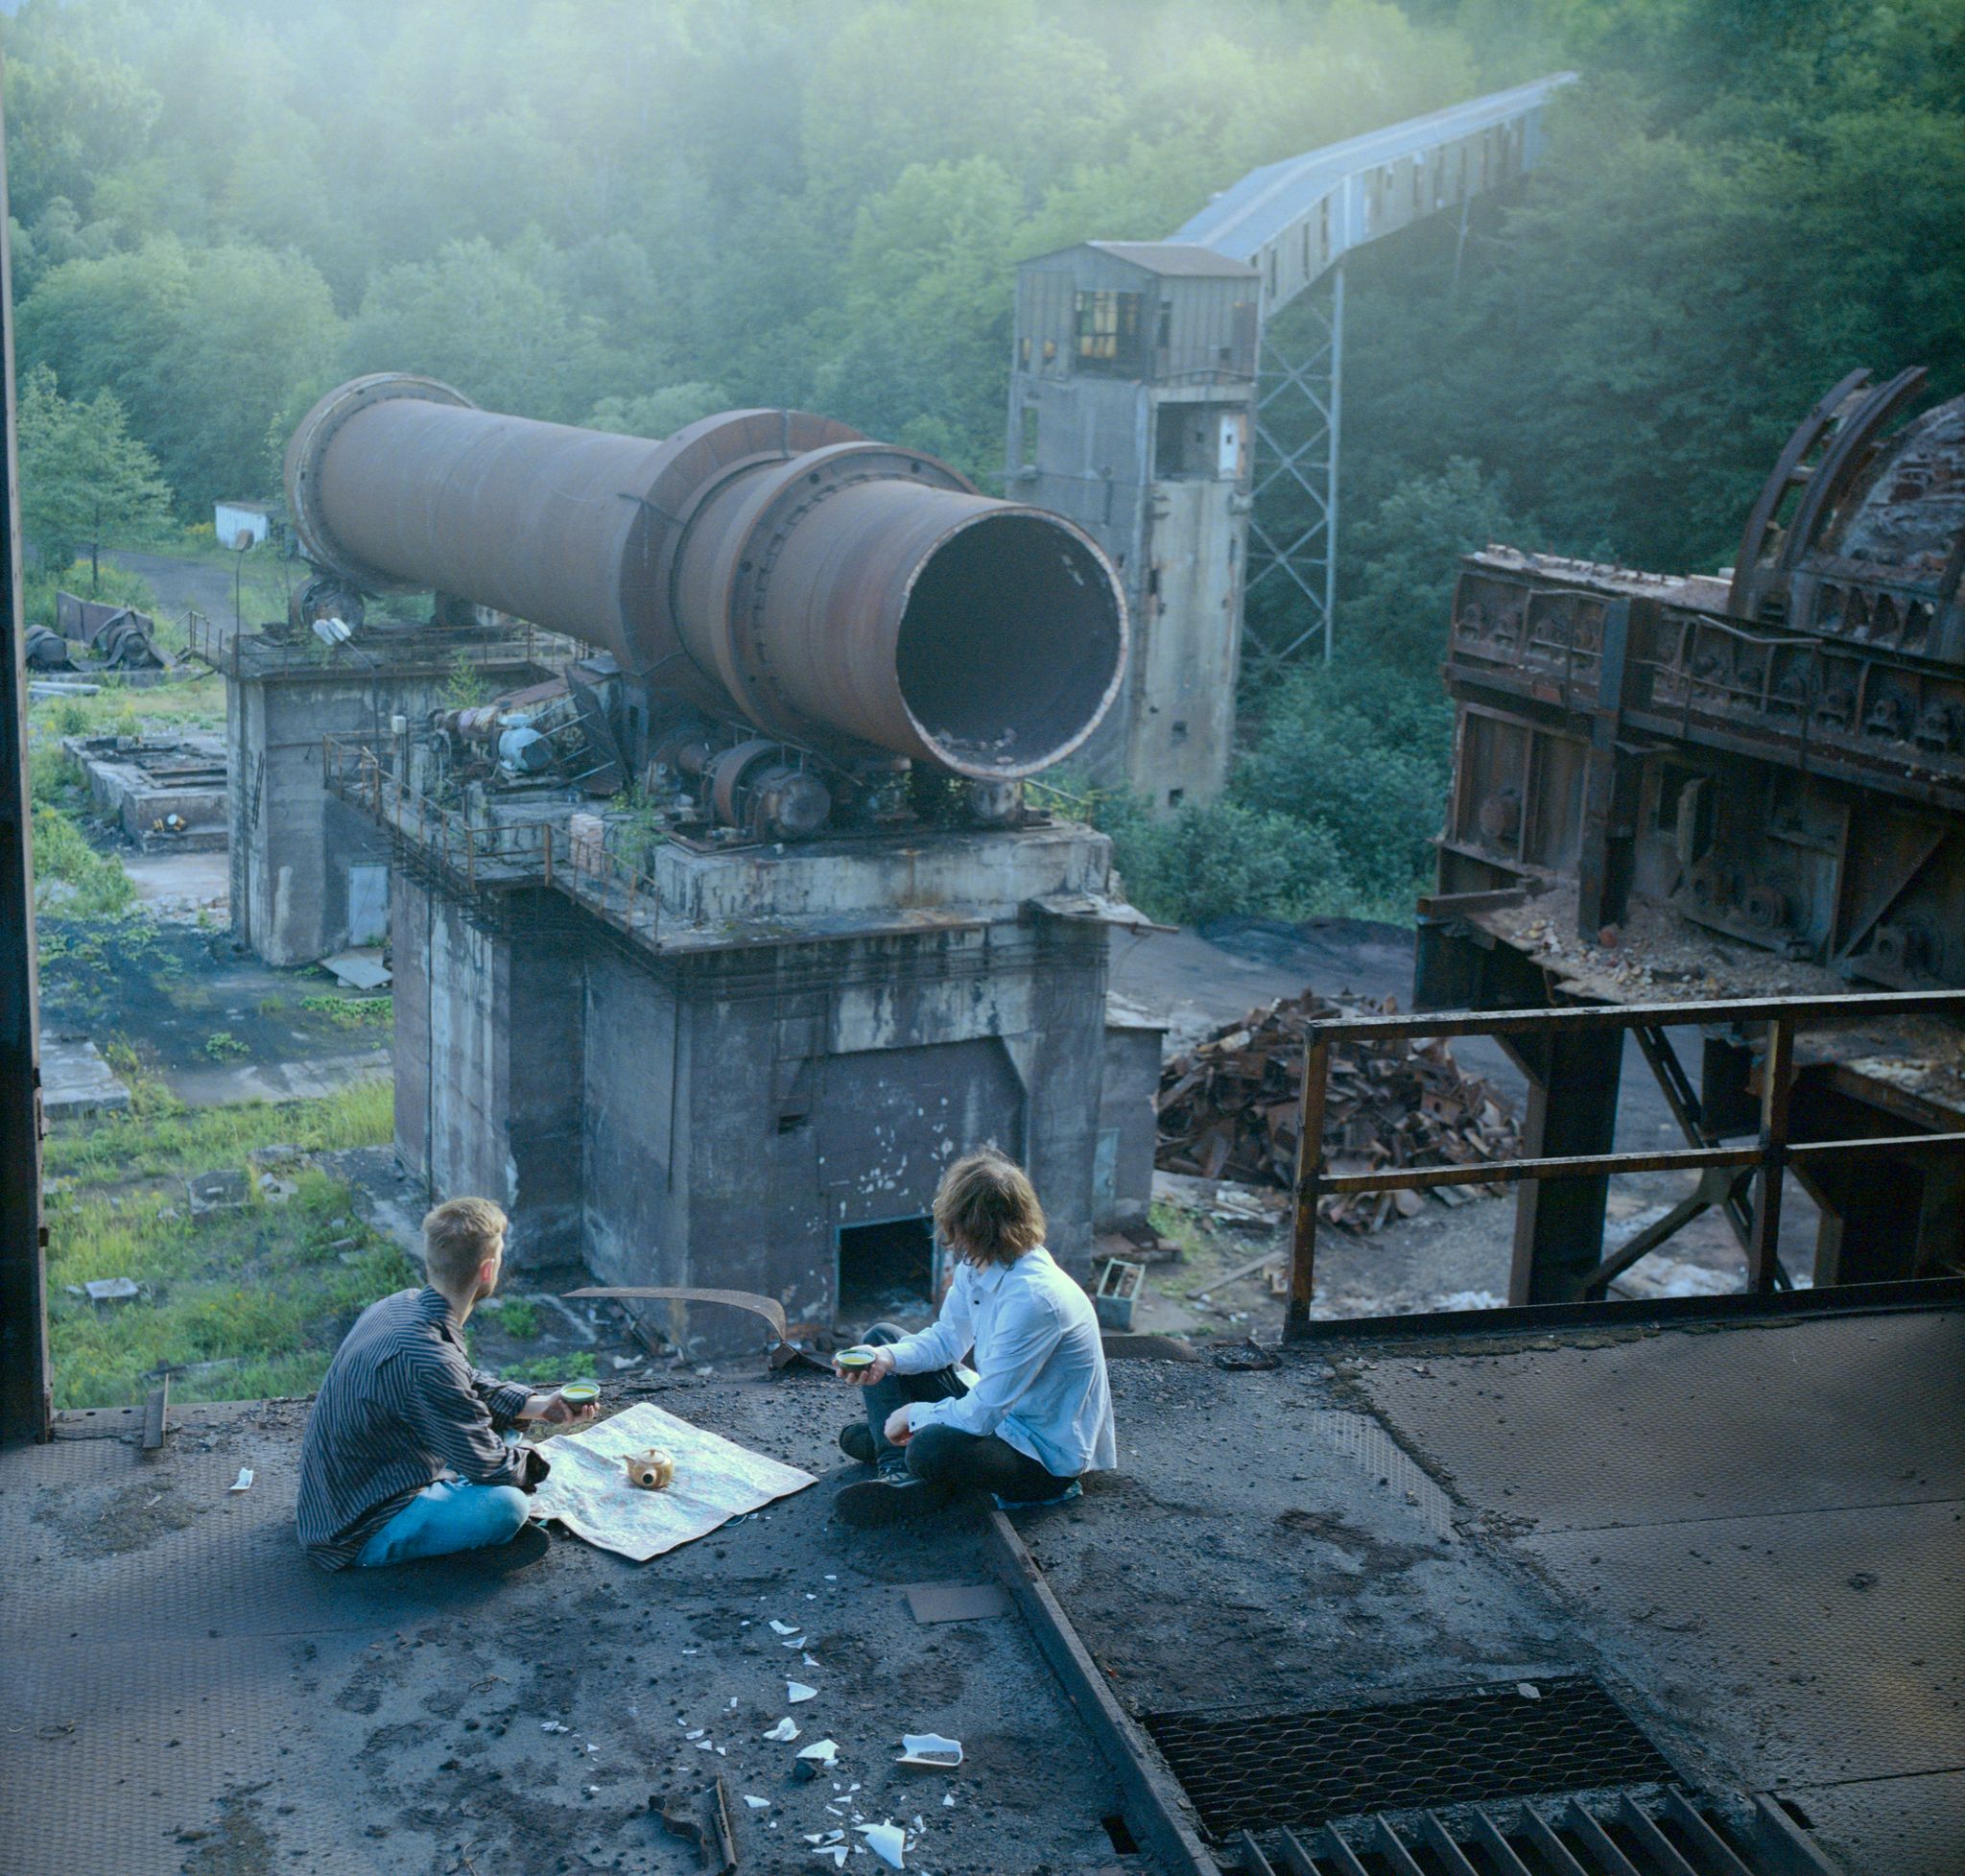 Two boys drinking tea in front of a derelict furnace